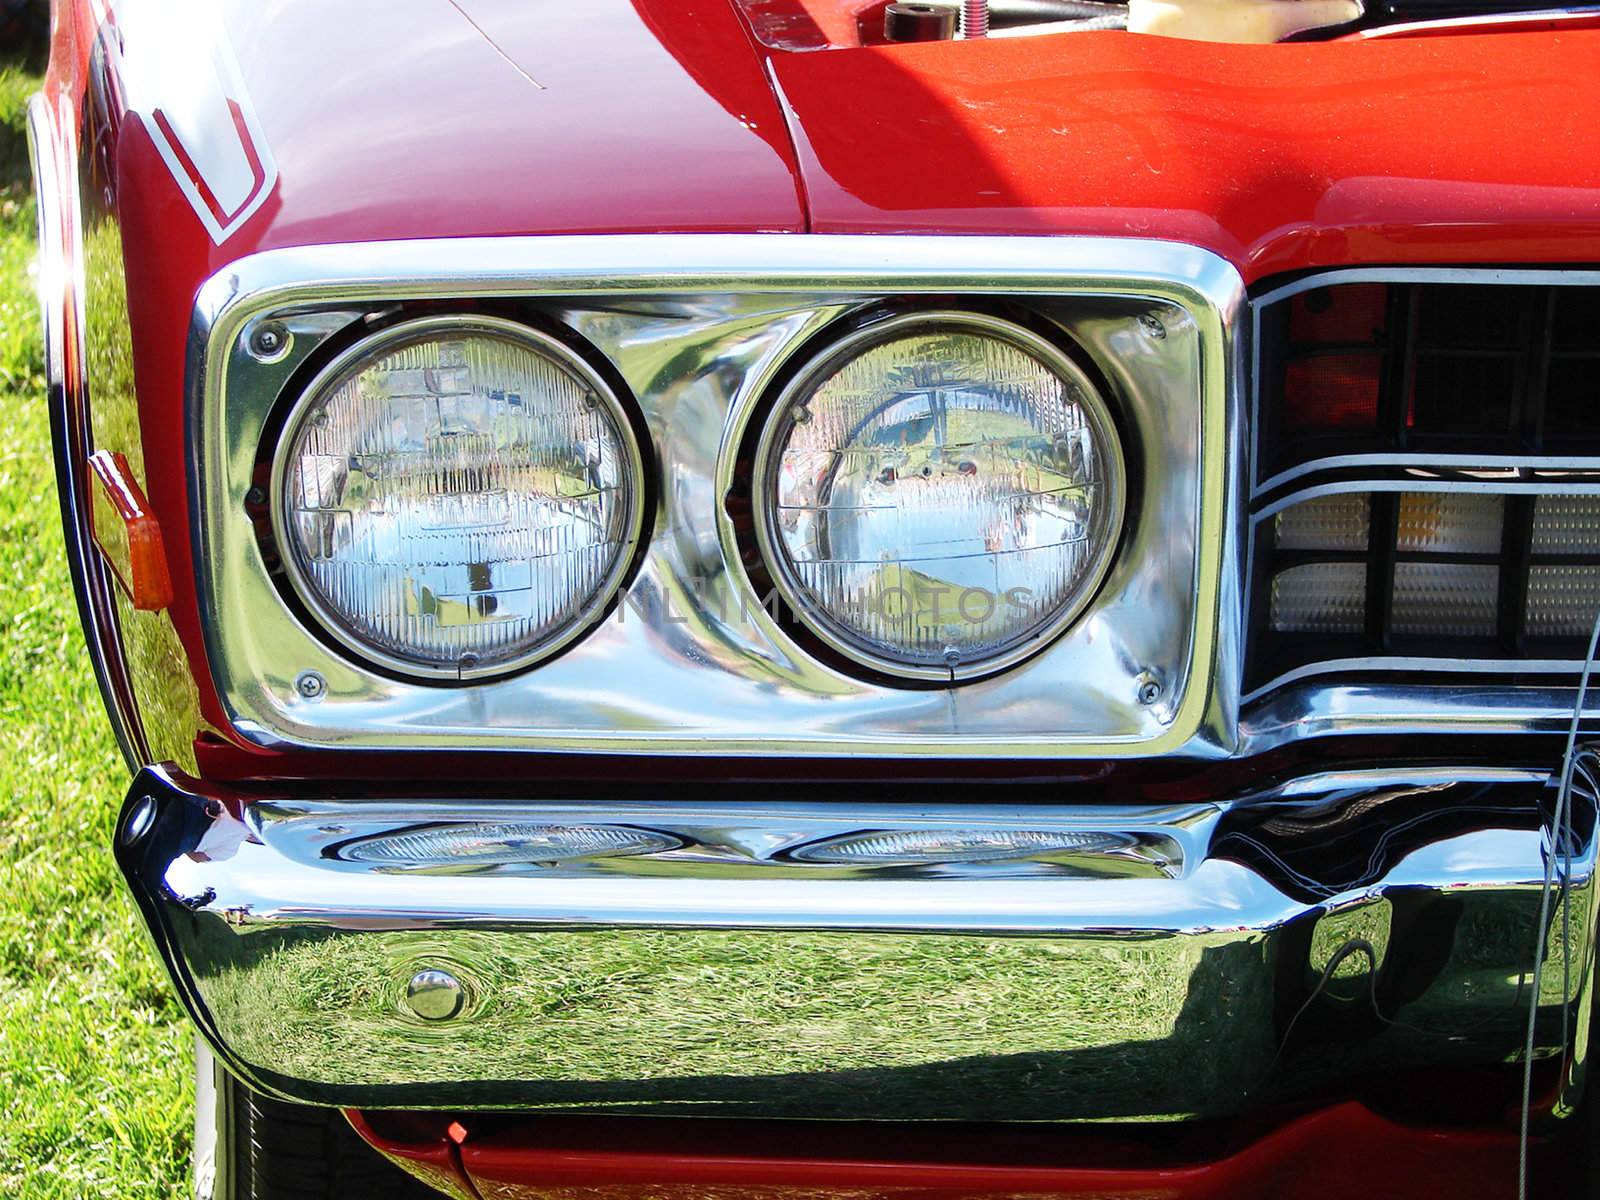 Close-up on the headlights and the chrome bumper of a Hot rod bright red car at a meet show